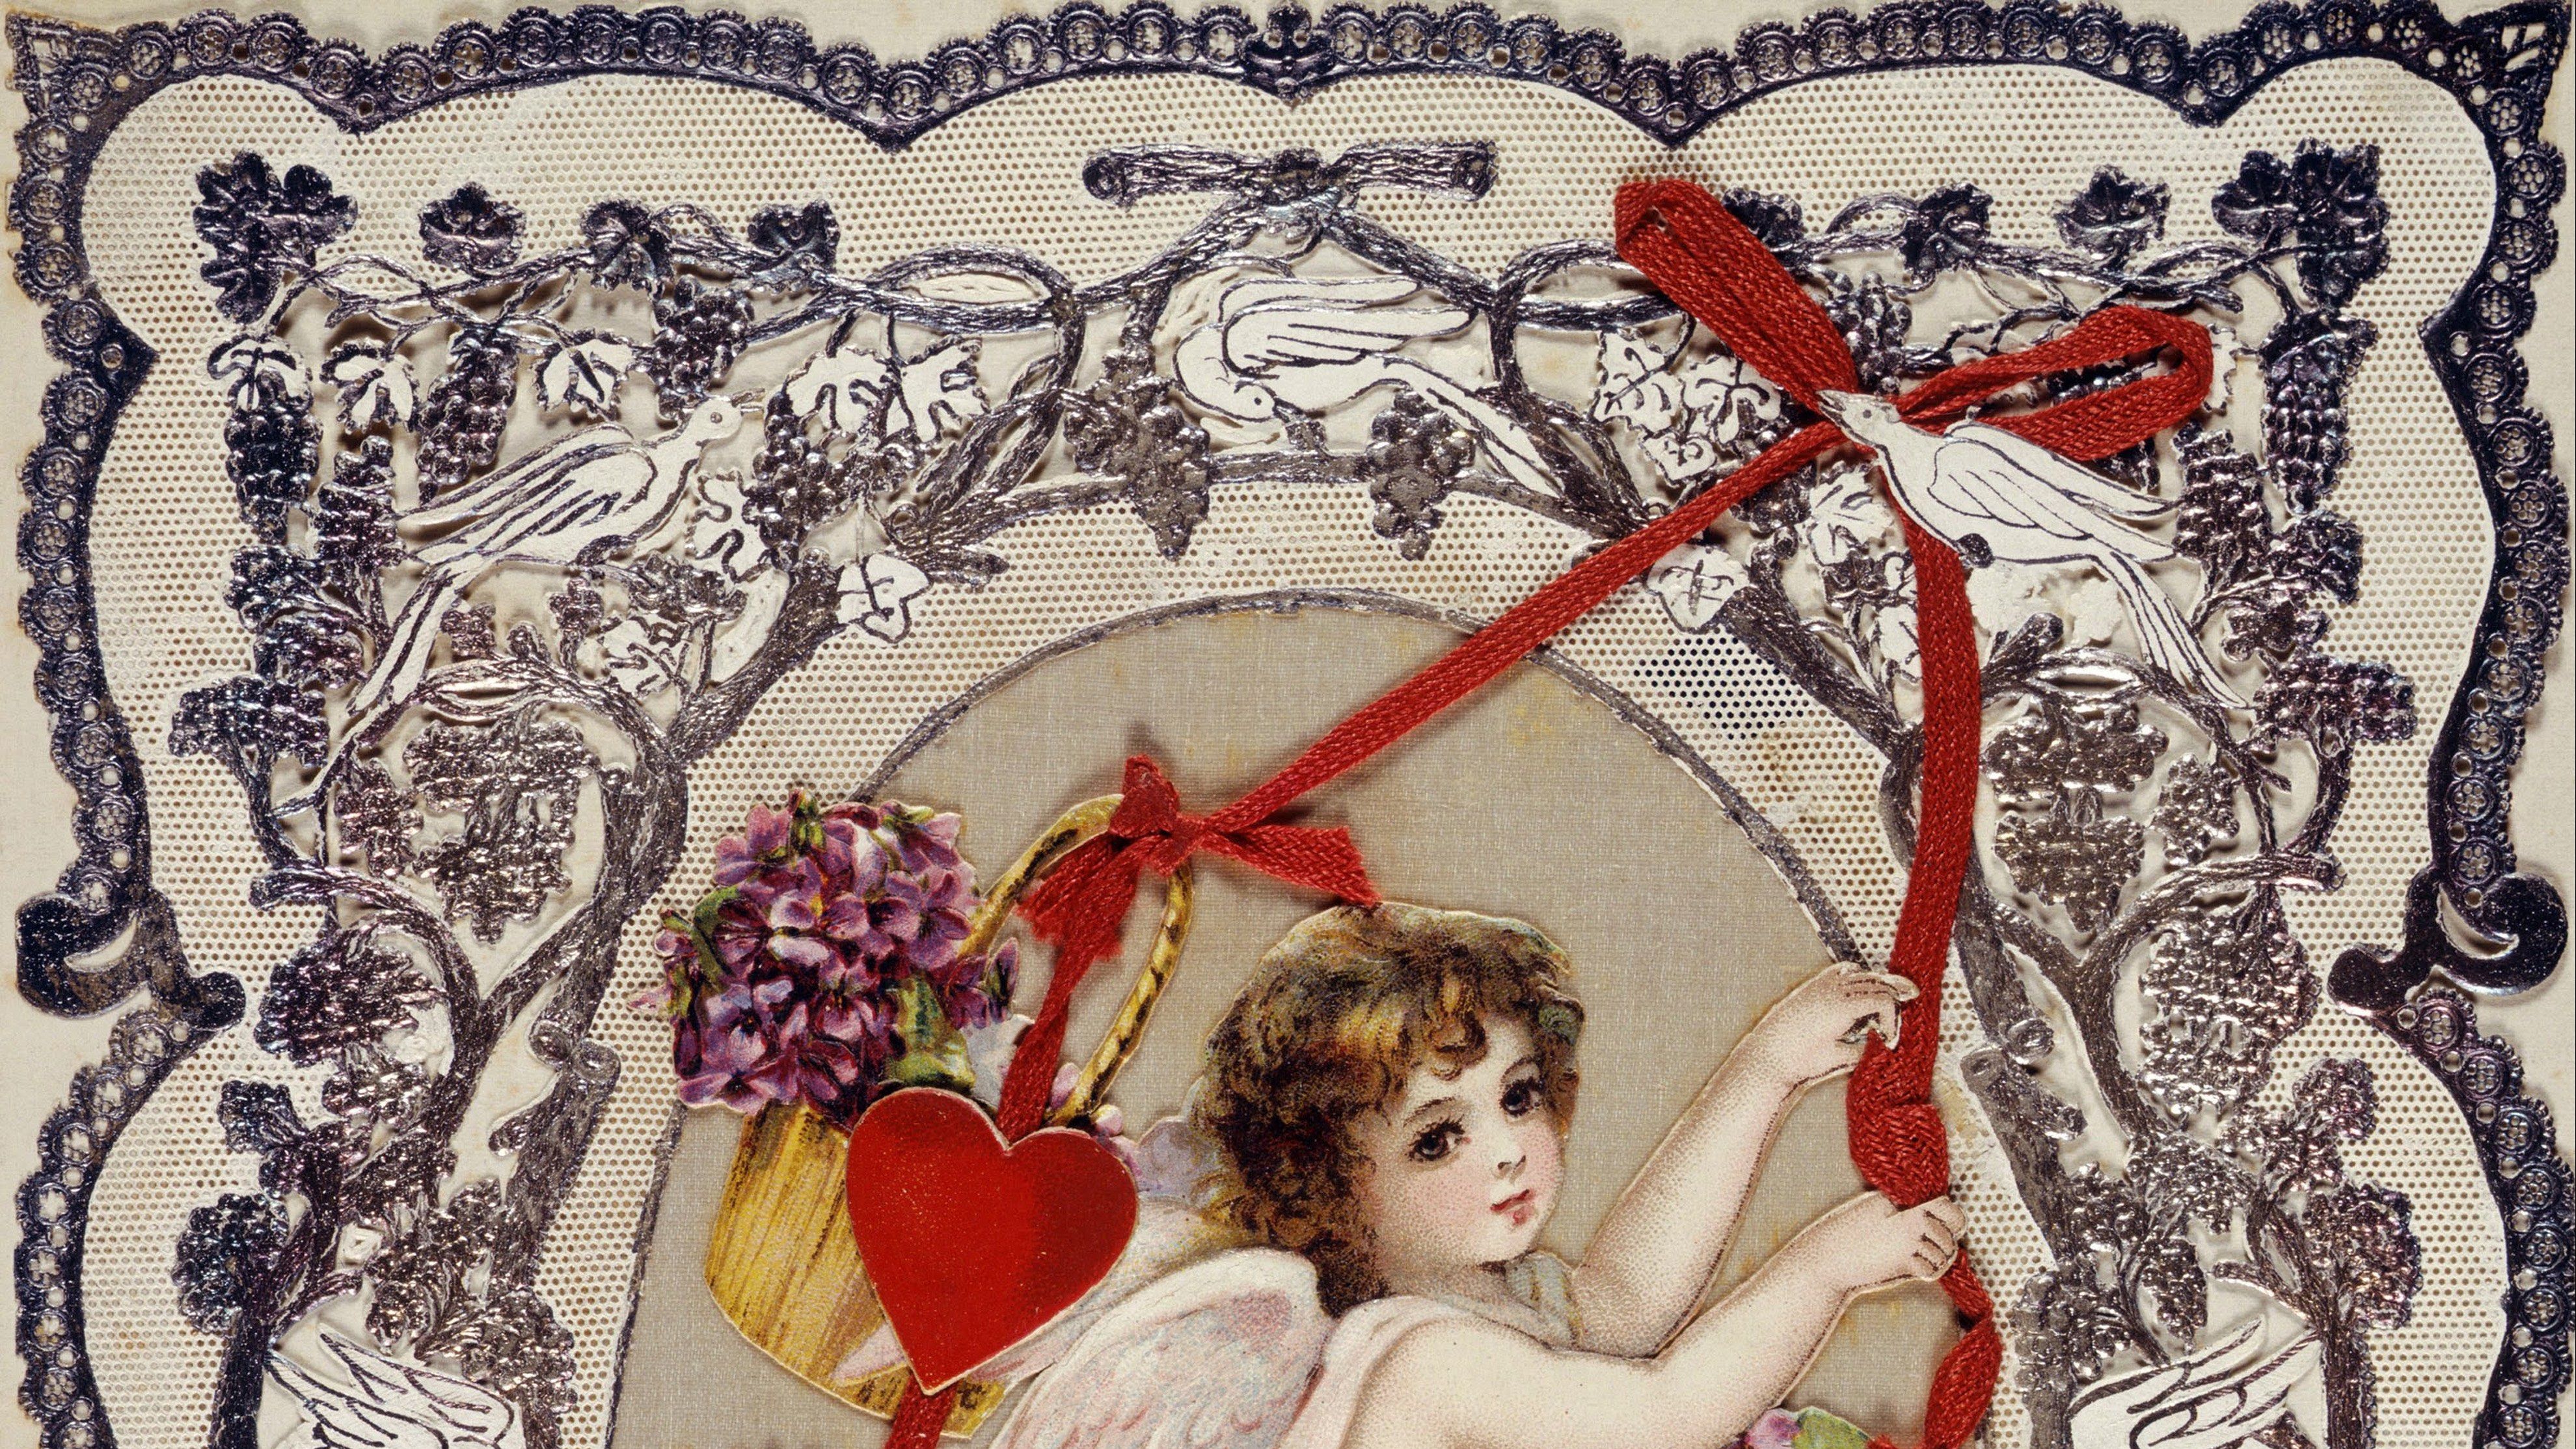 Valentine's Day: How Did It Start and Become Popular in the U.S.?